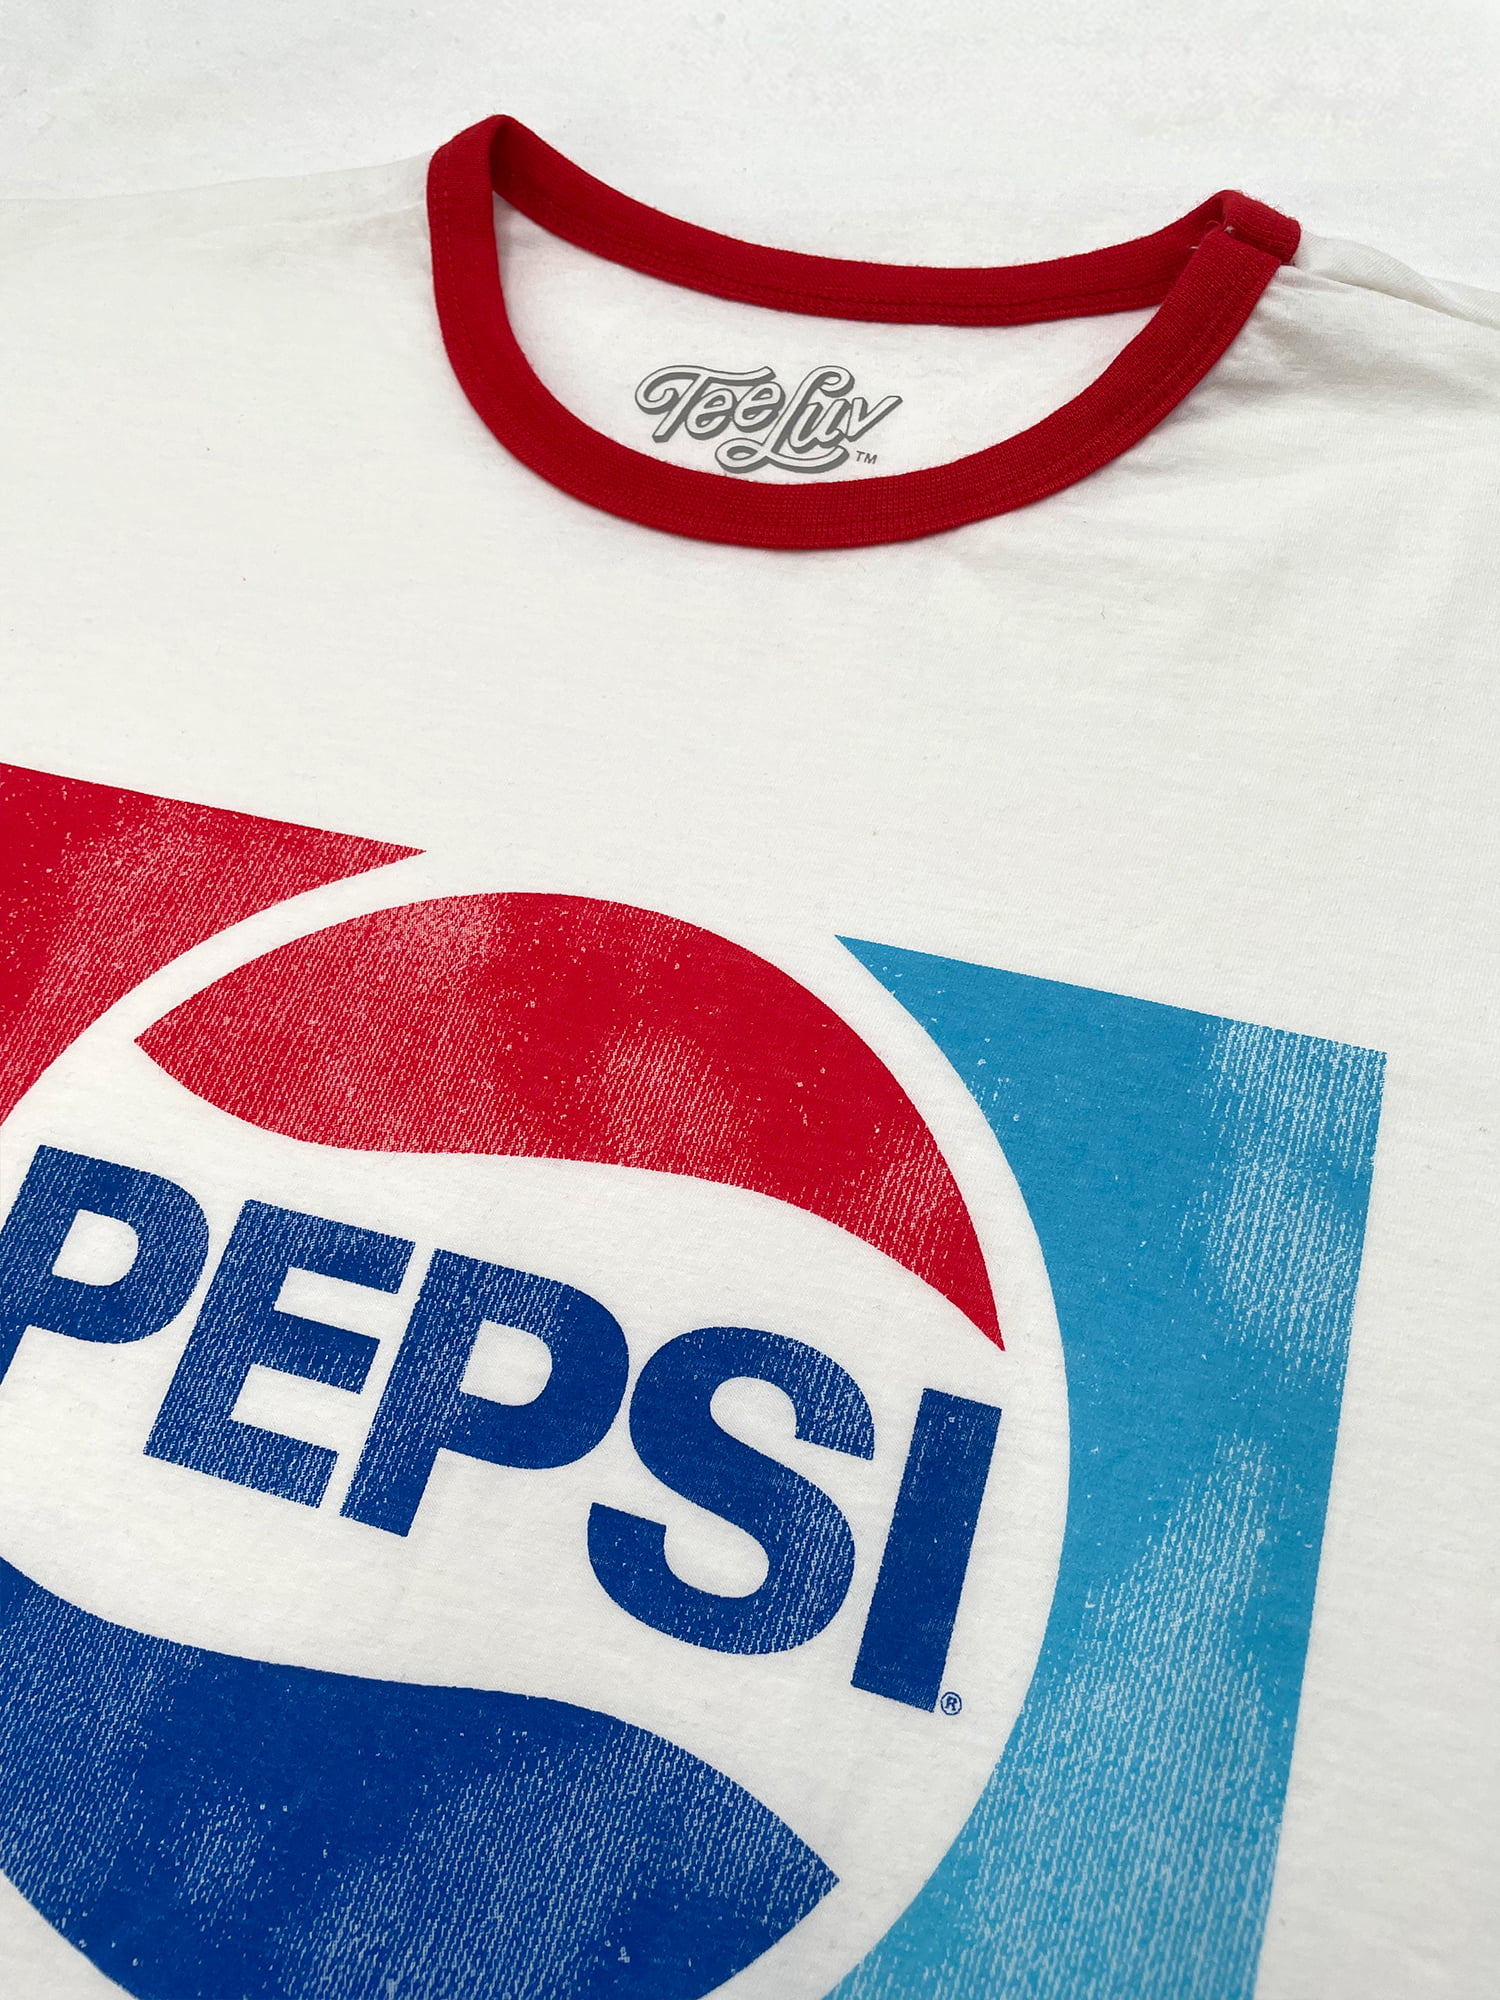 Tee Luv Men's Faded Pepsi 70s Logo White and Red Ringer T-Shirt